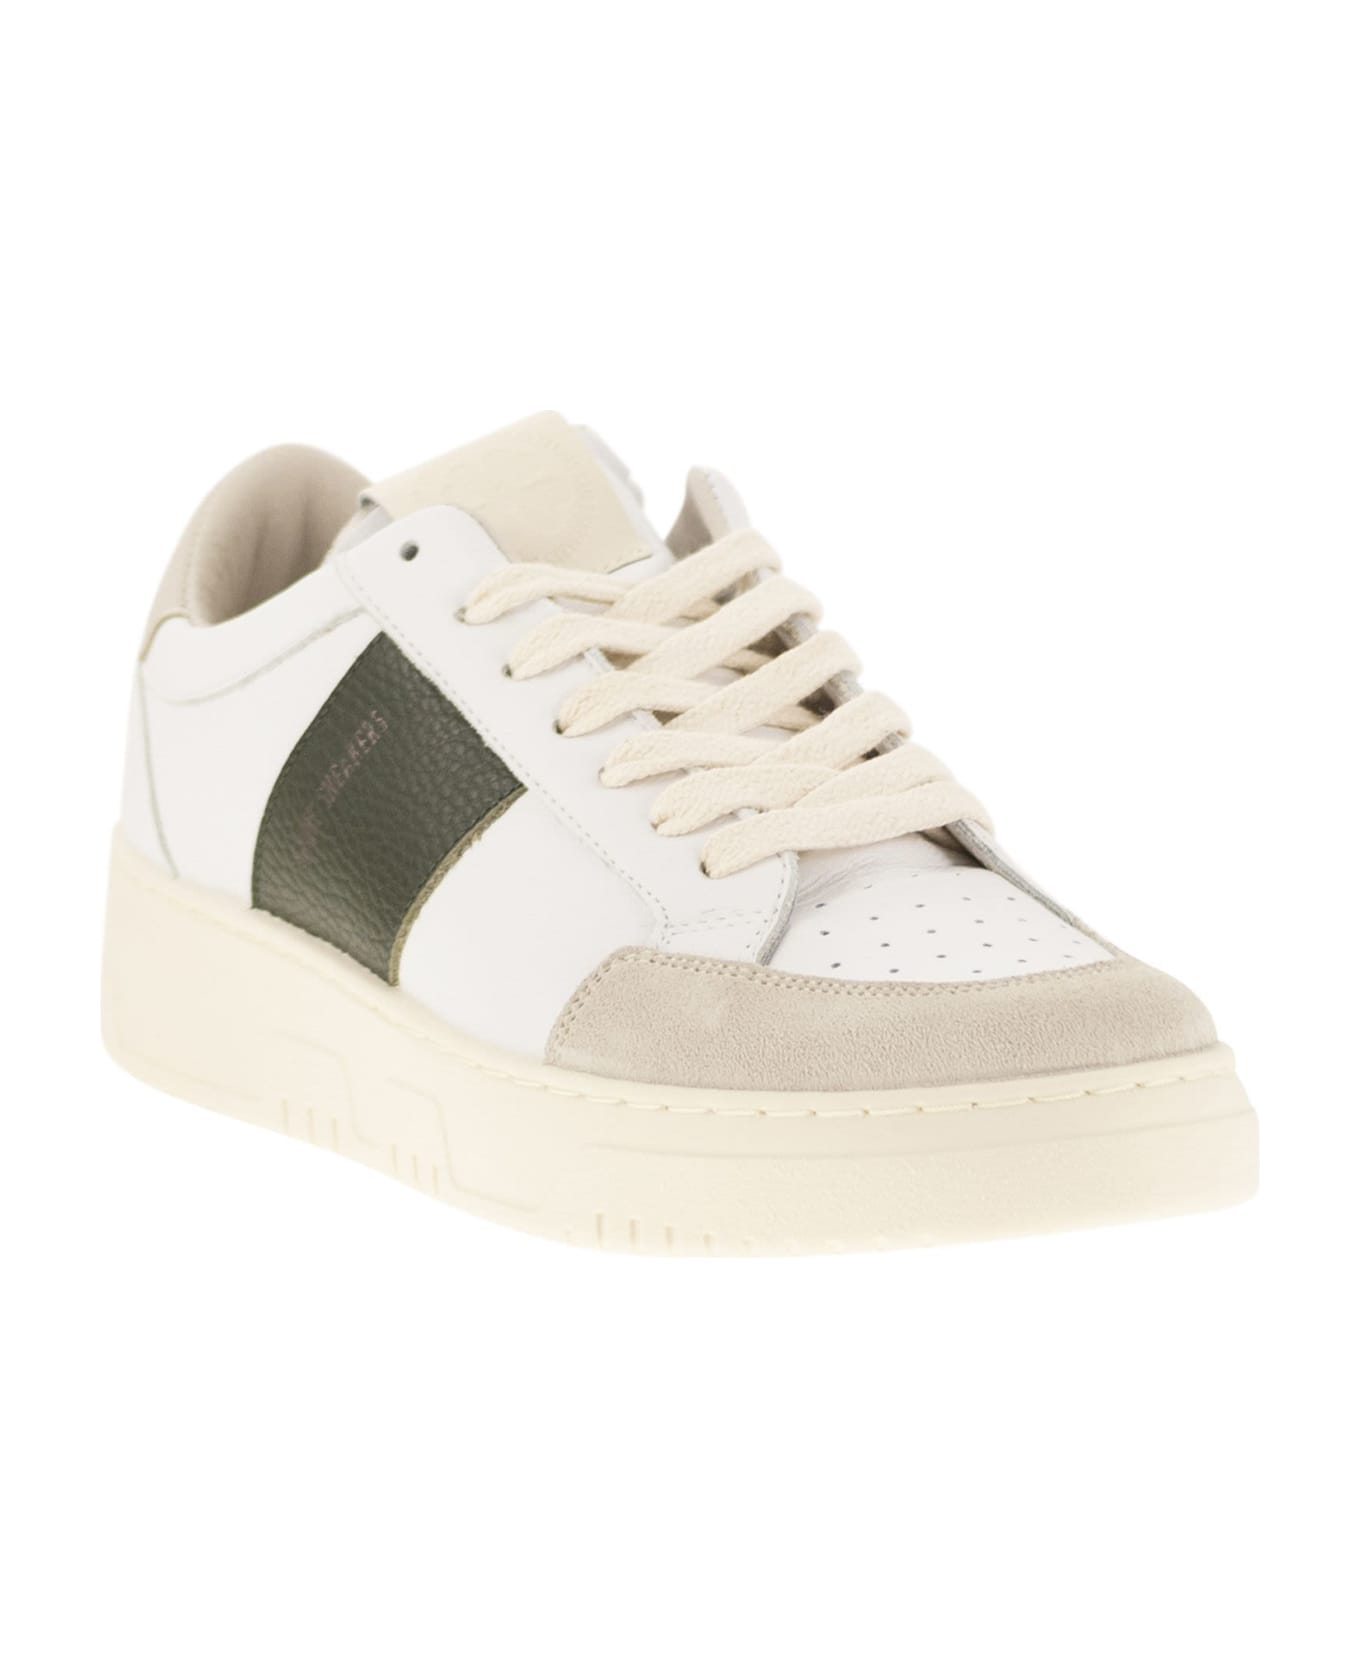 Saint Sneakers Sail - Leather And Suede Trainers - White/green スニーカー